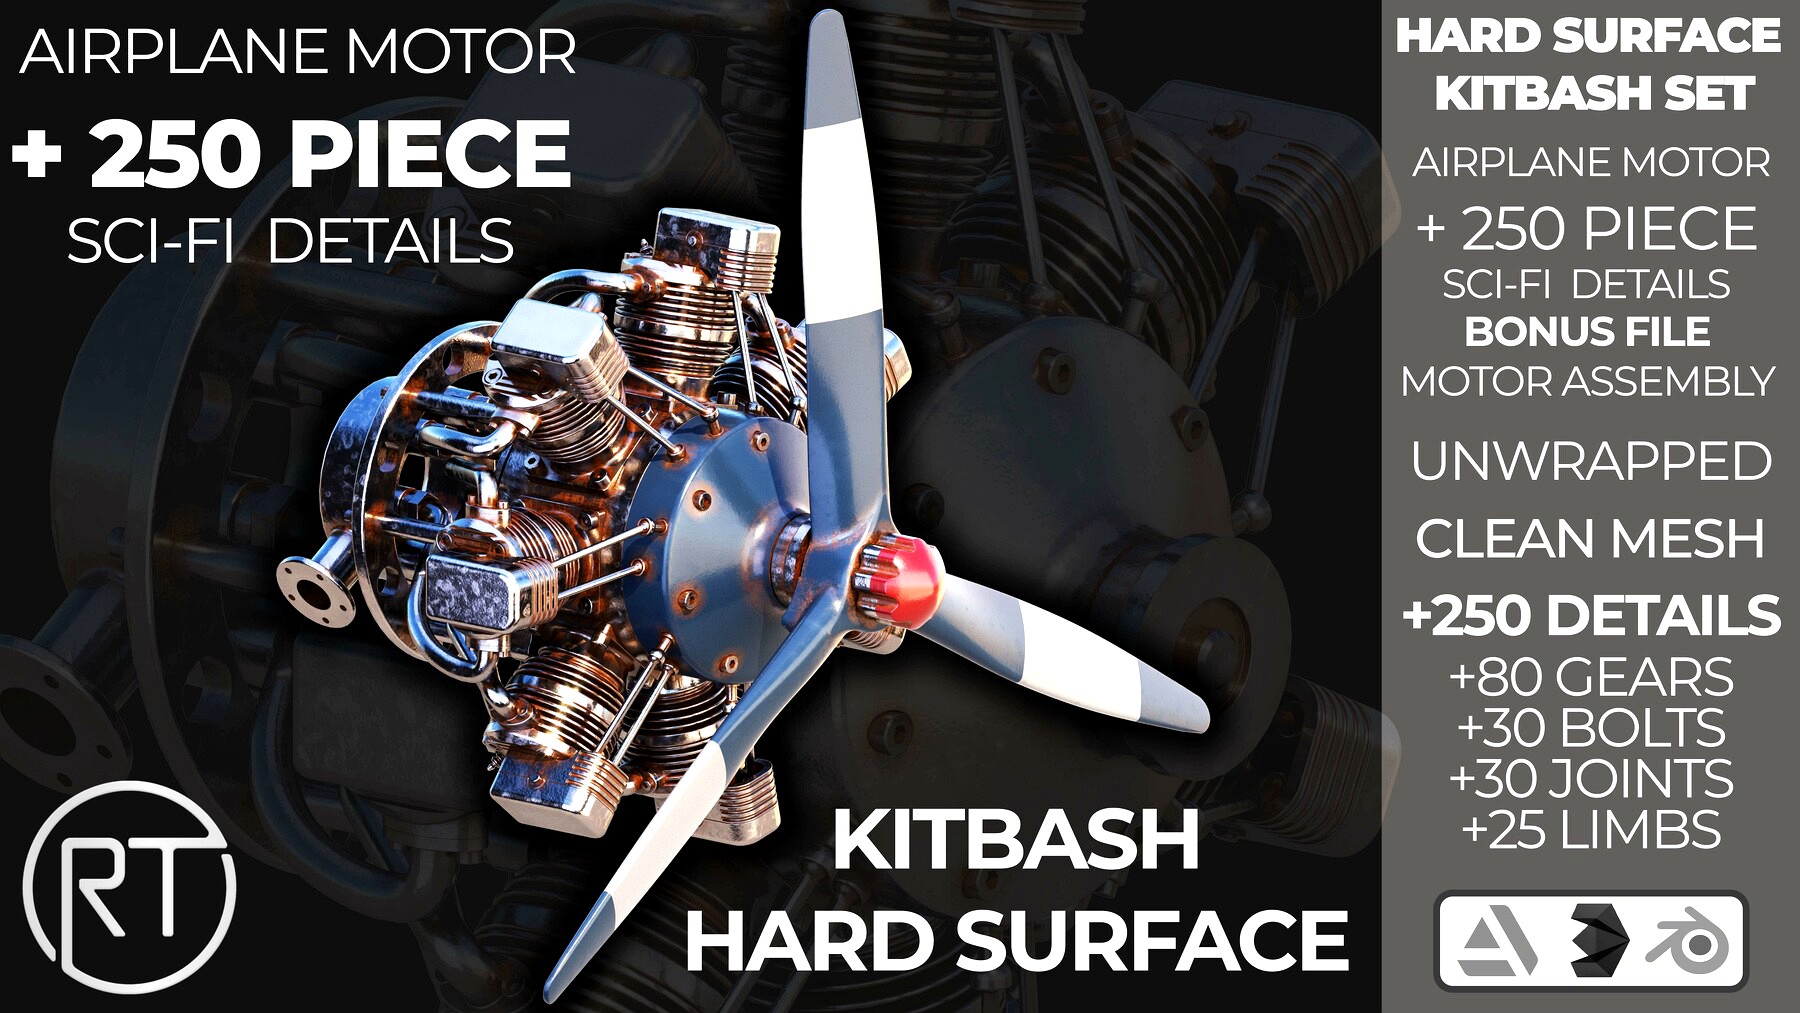 HARD SURFACE KITBASH VOL 1 (250 UNIQUE PARTS) + AIRPLANE ENGINE AND ROBOT LIMBS